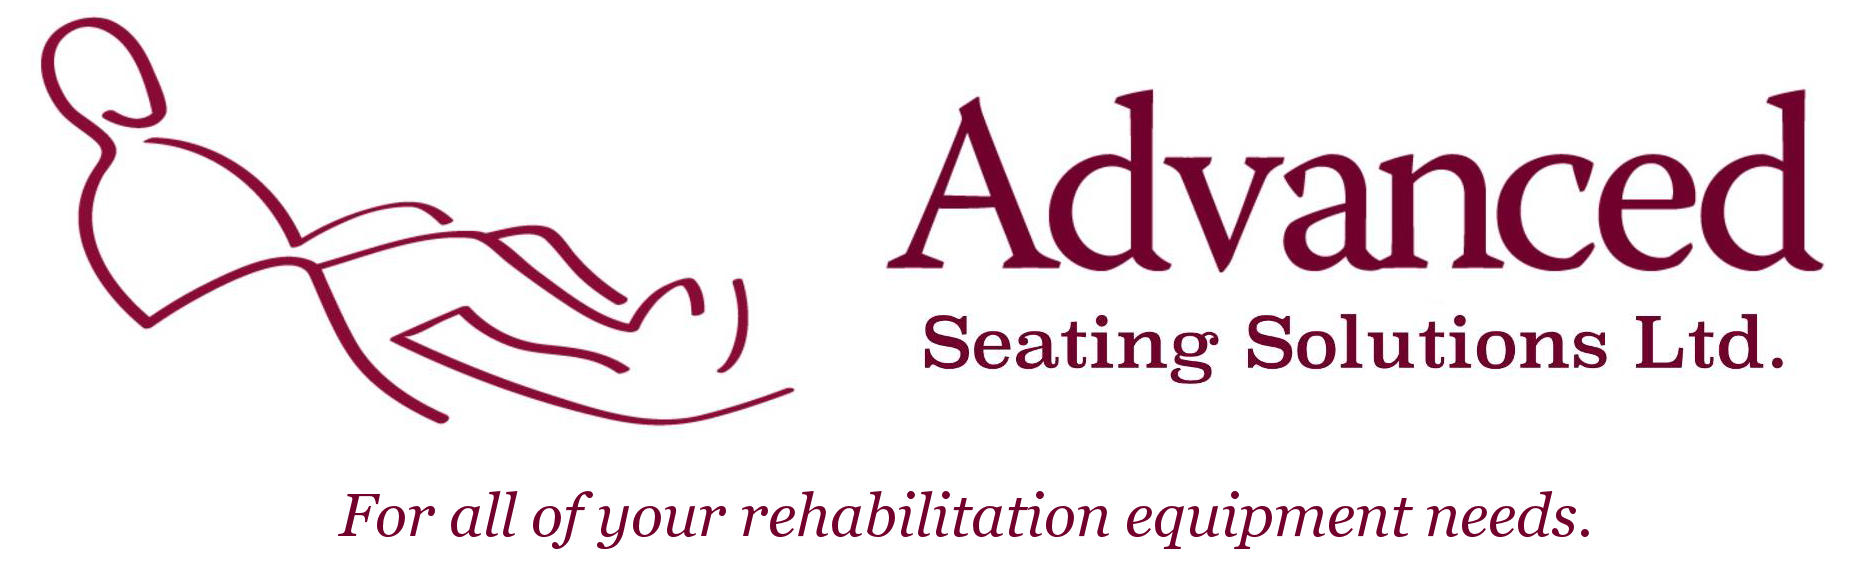 Advanced Seating Solutions